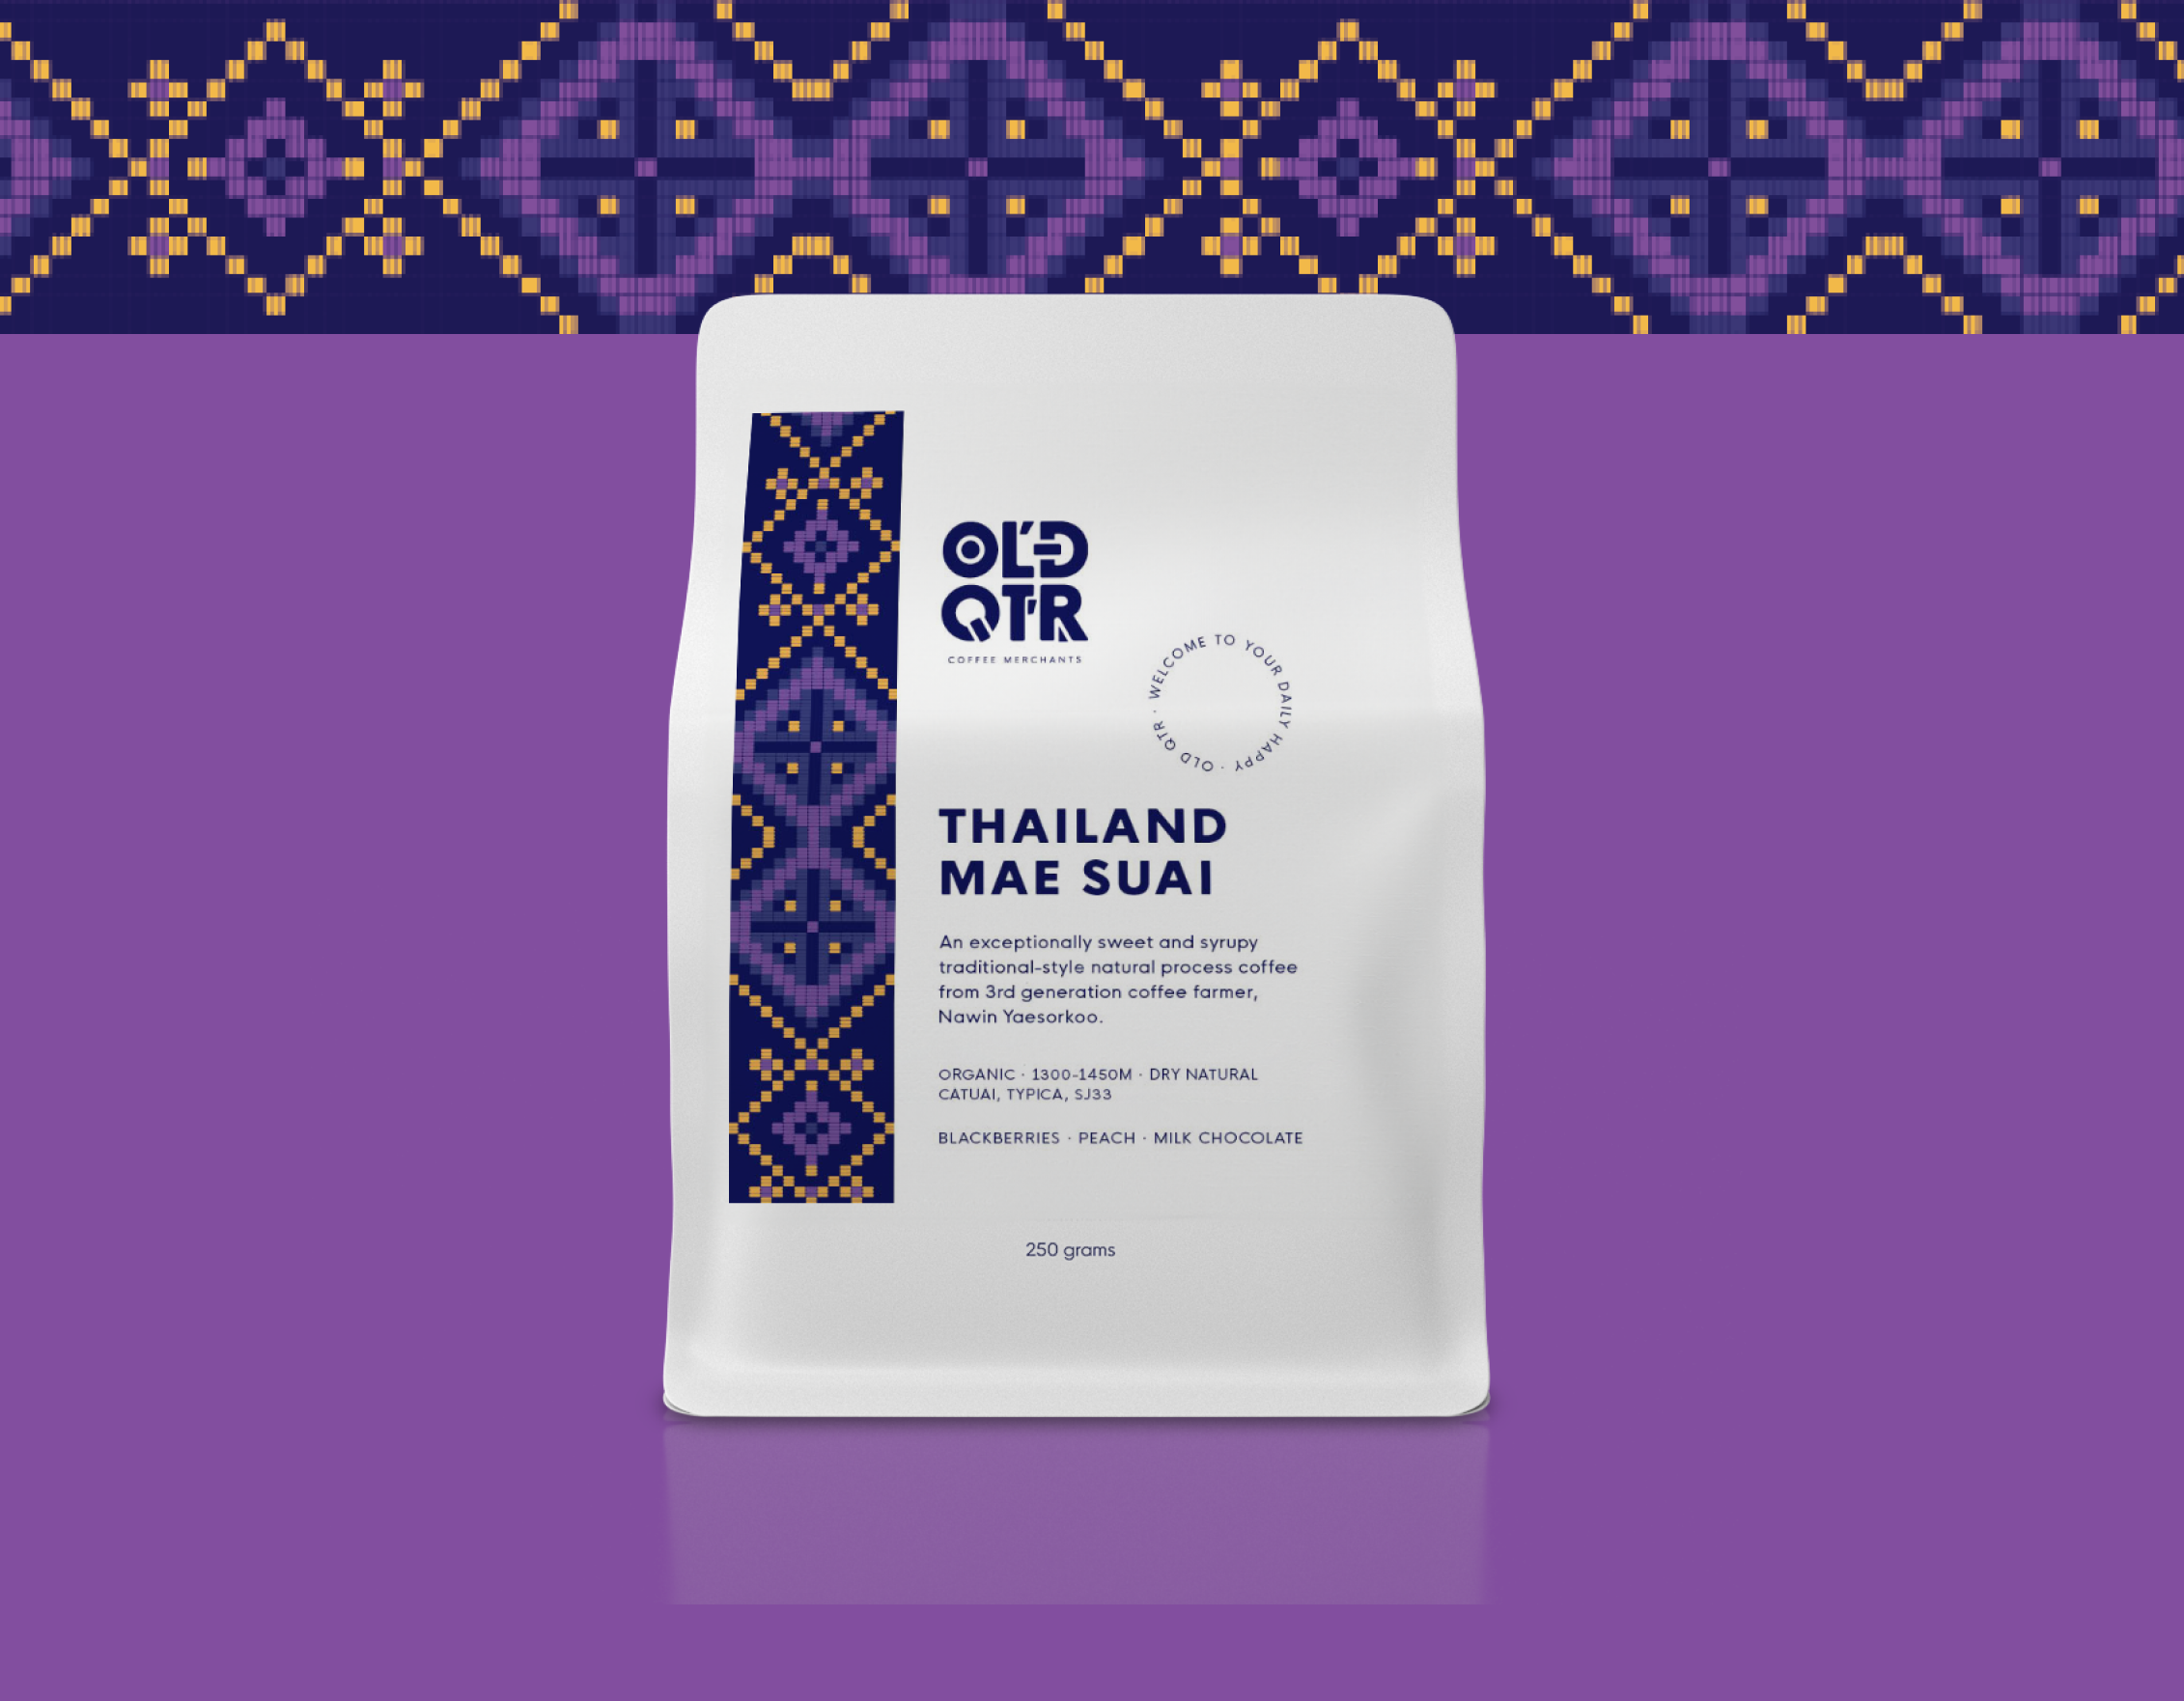 Old Quarter Coffee Merchants - Ethical Organic Direct Trade Specialty Coffee Roasted in Ballina Australia available for Wholesale - Rare Organic Specialty Coffee from Southeast Asia - Thailand Mae Suai Filter Coffee - Black Coffee